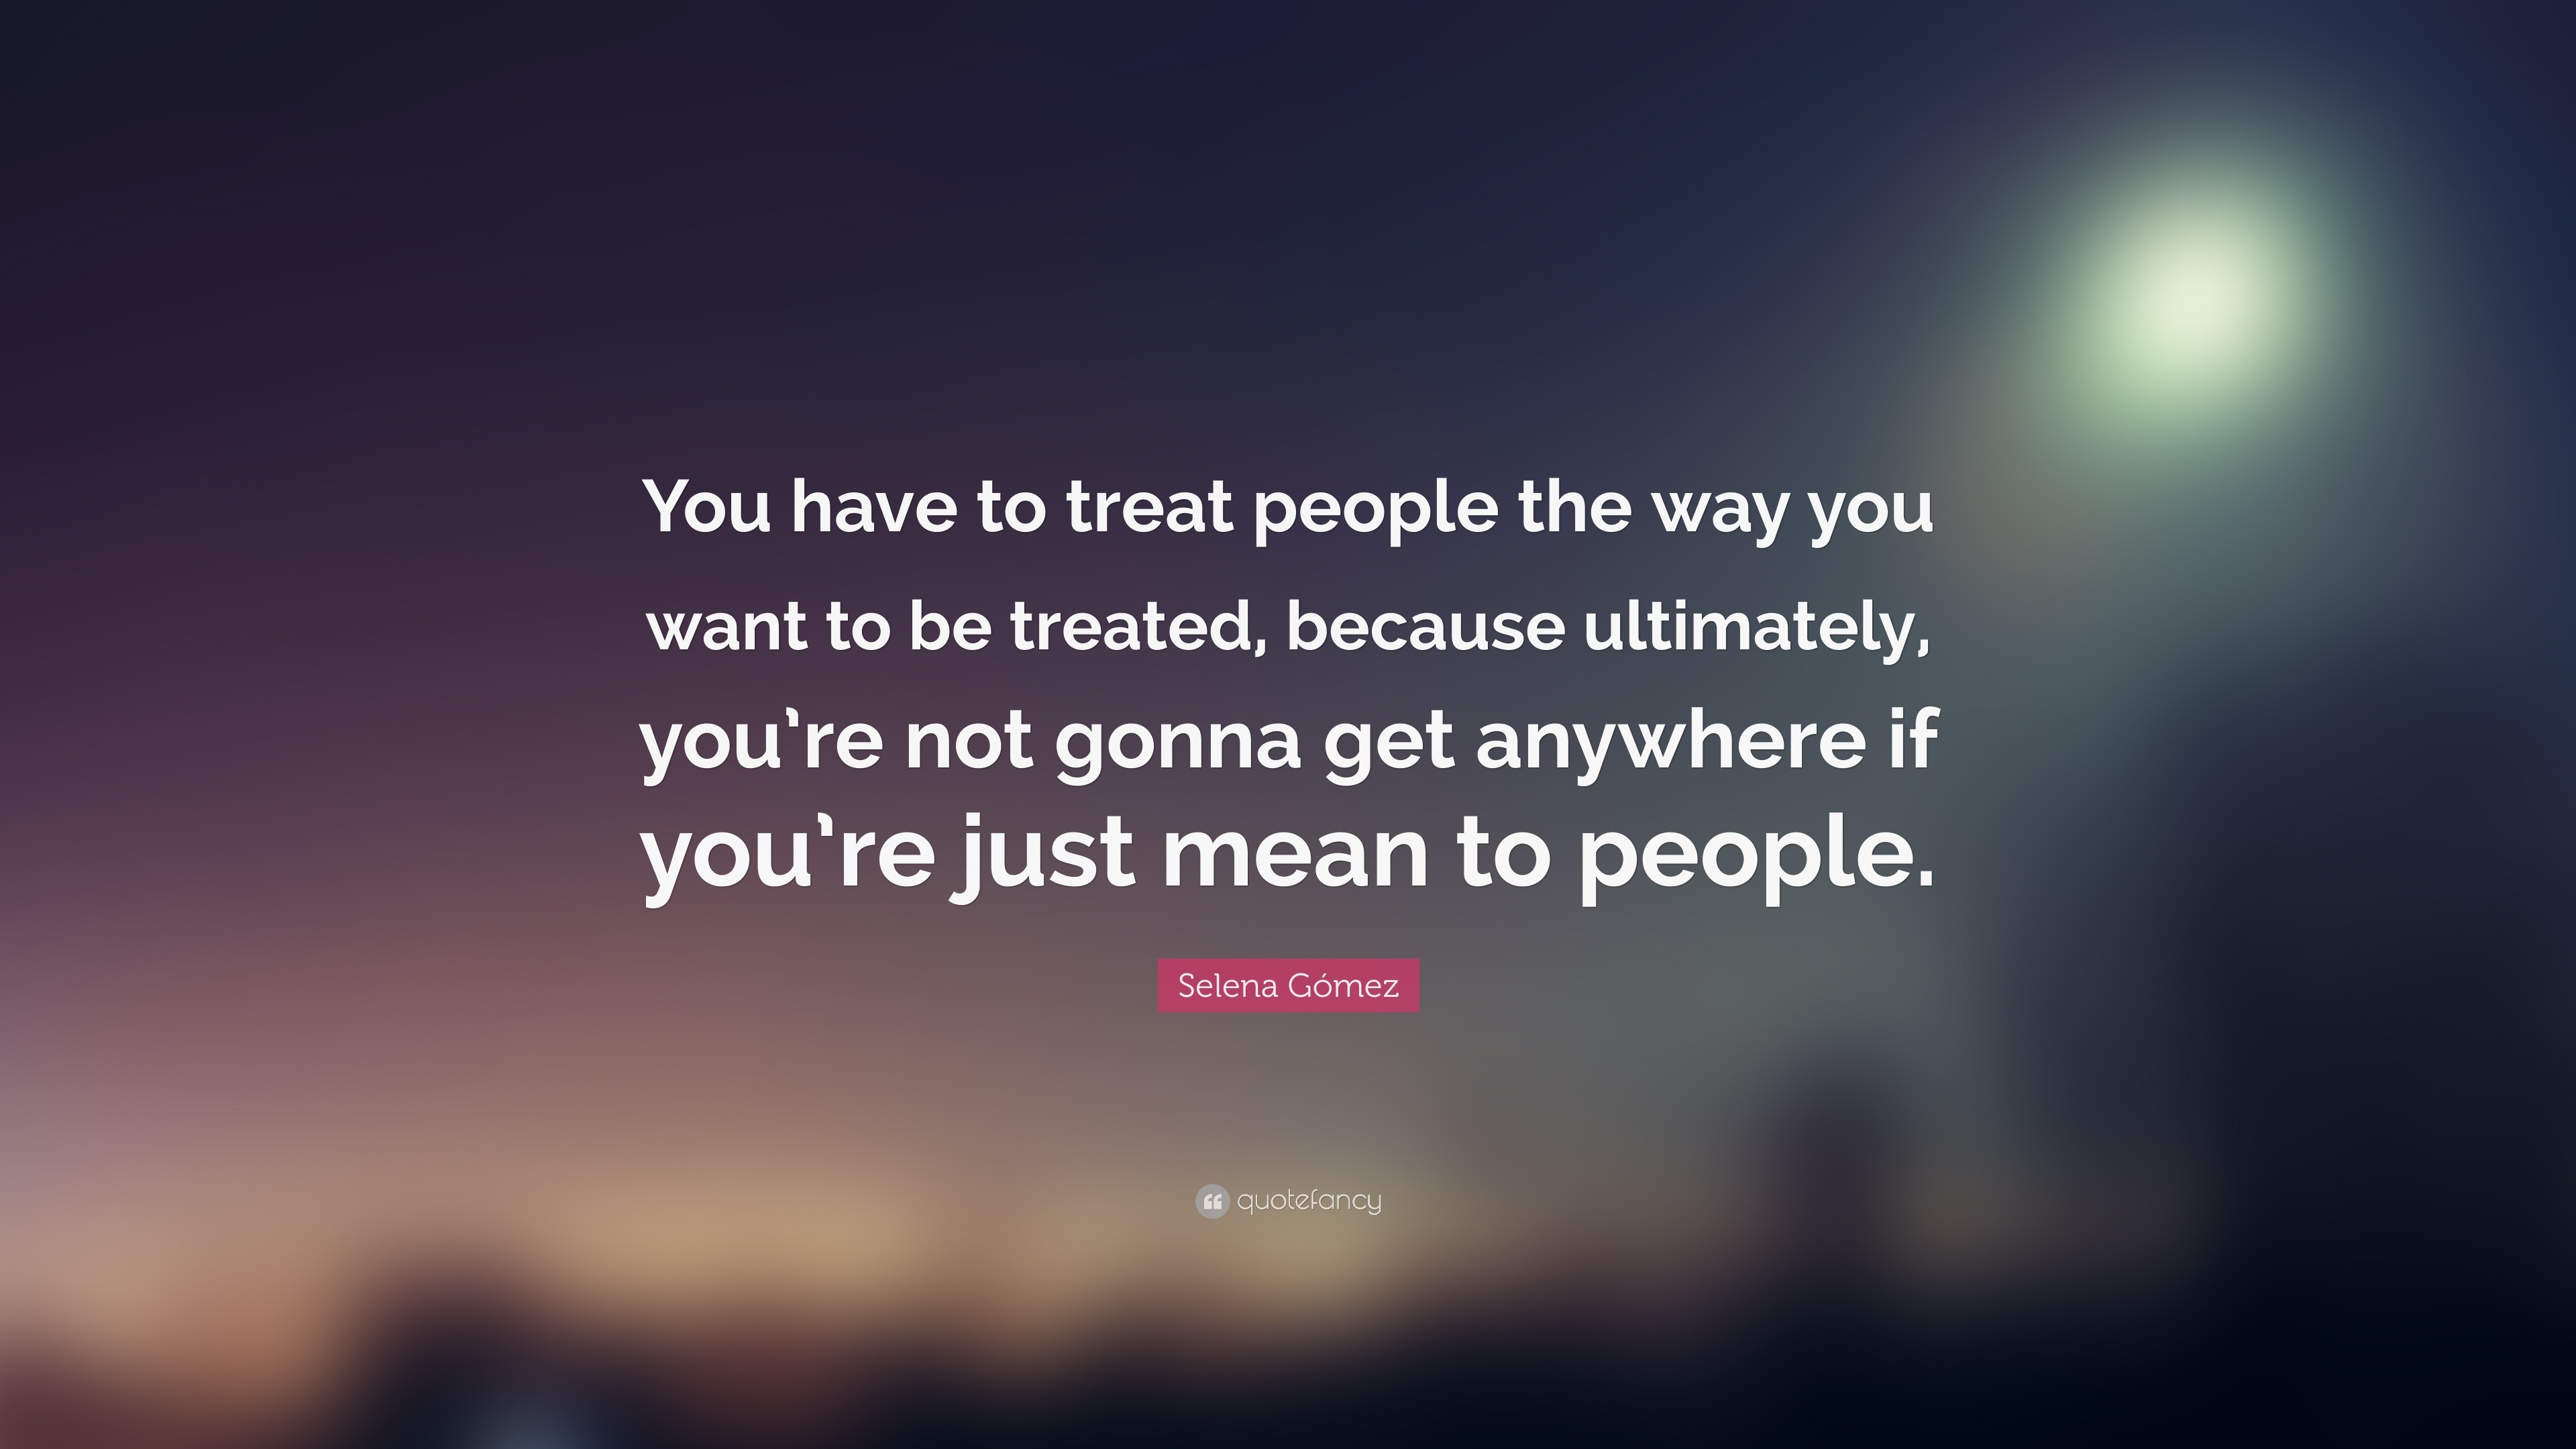 Selena Gómez Quote “You have to treat people the way you want to be